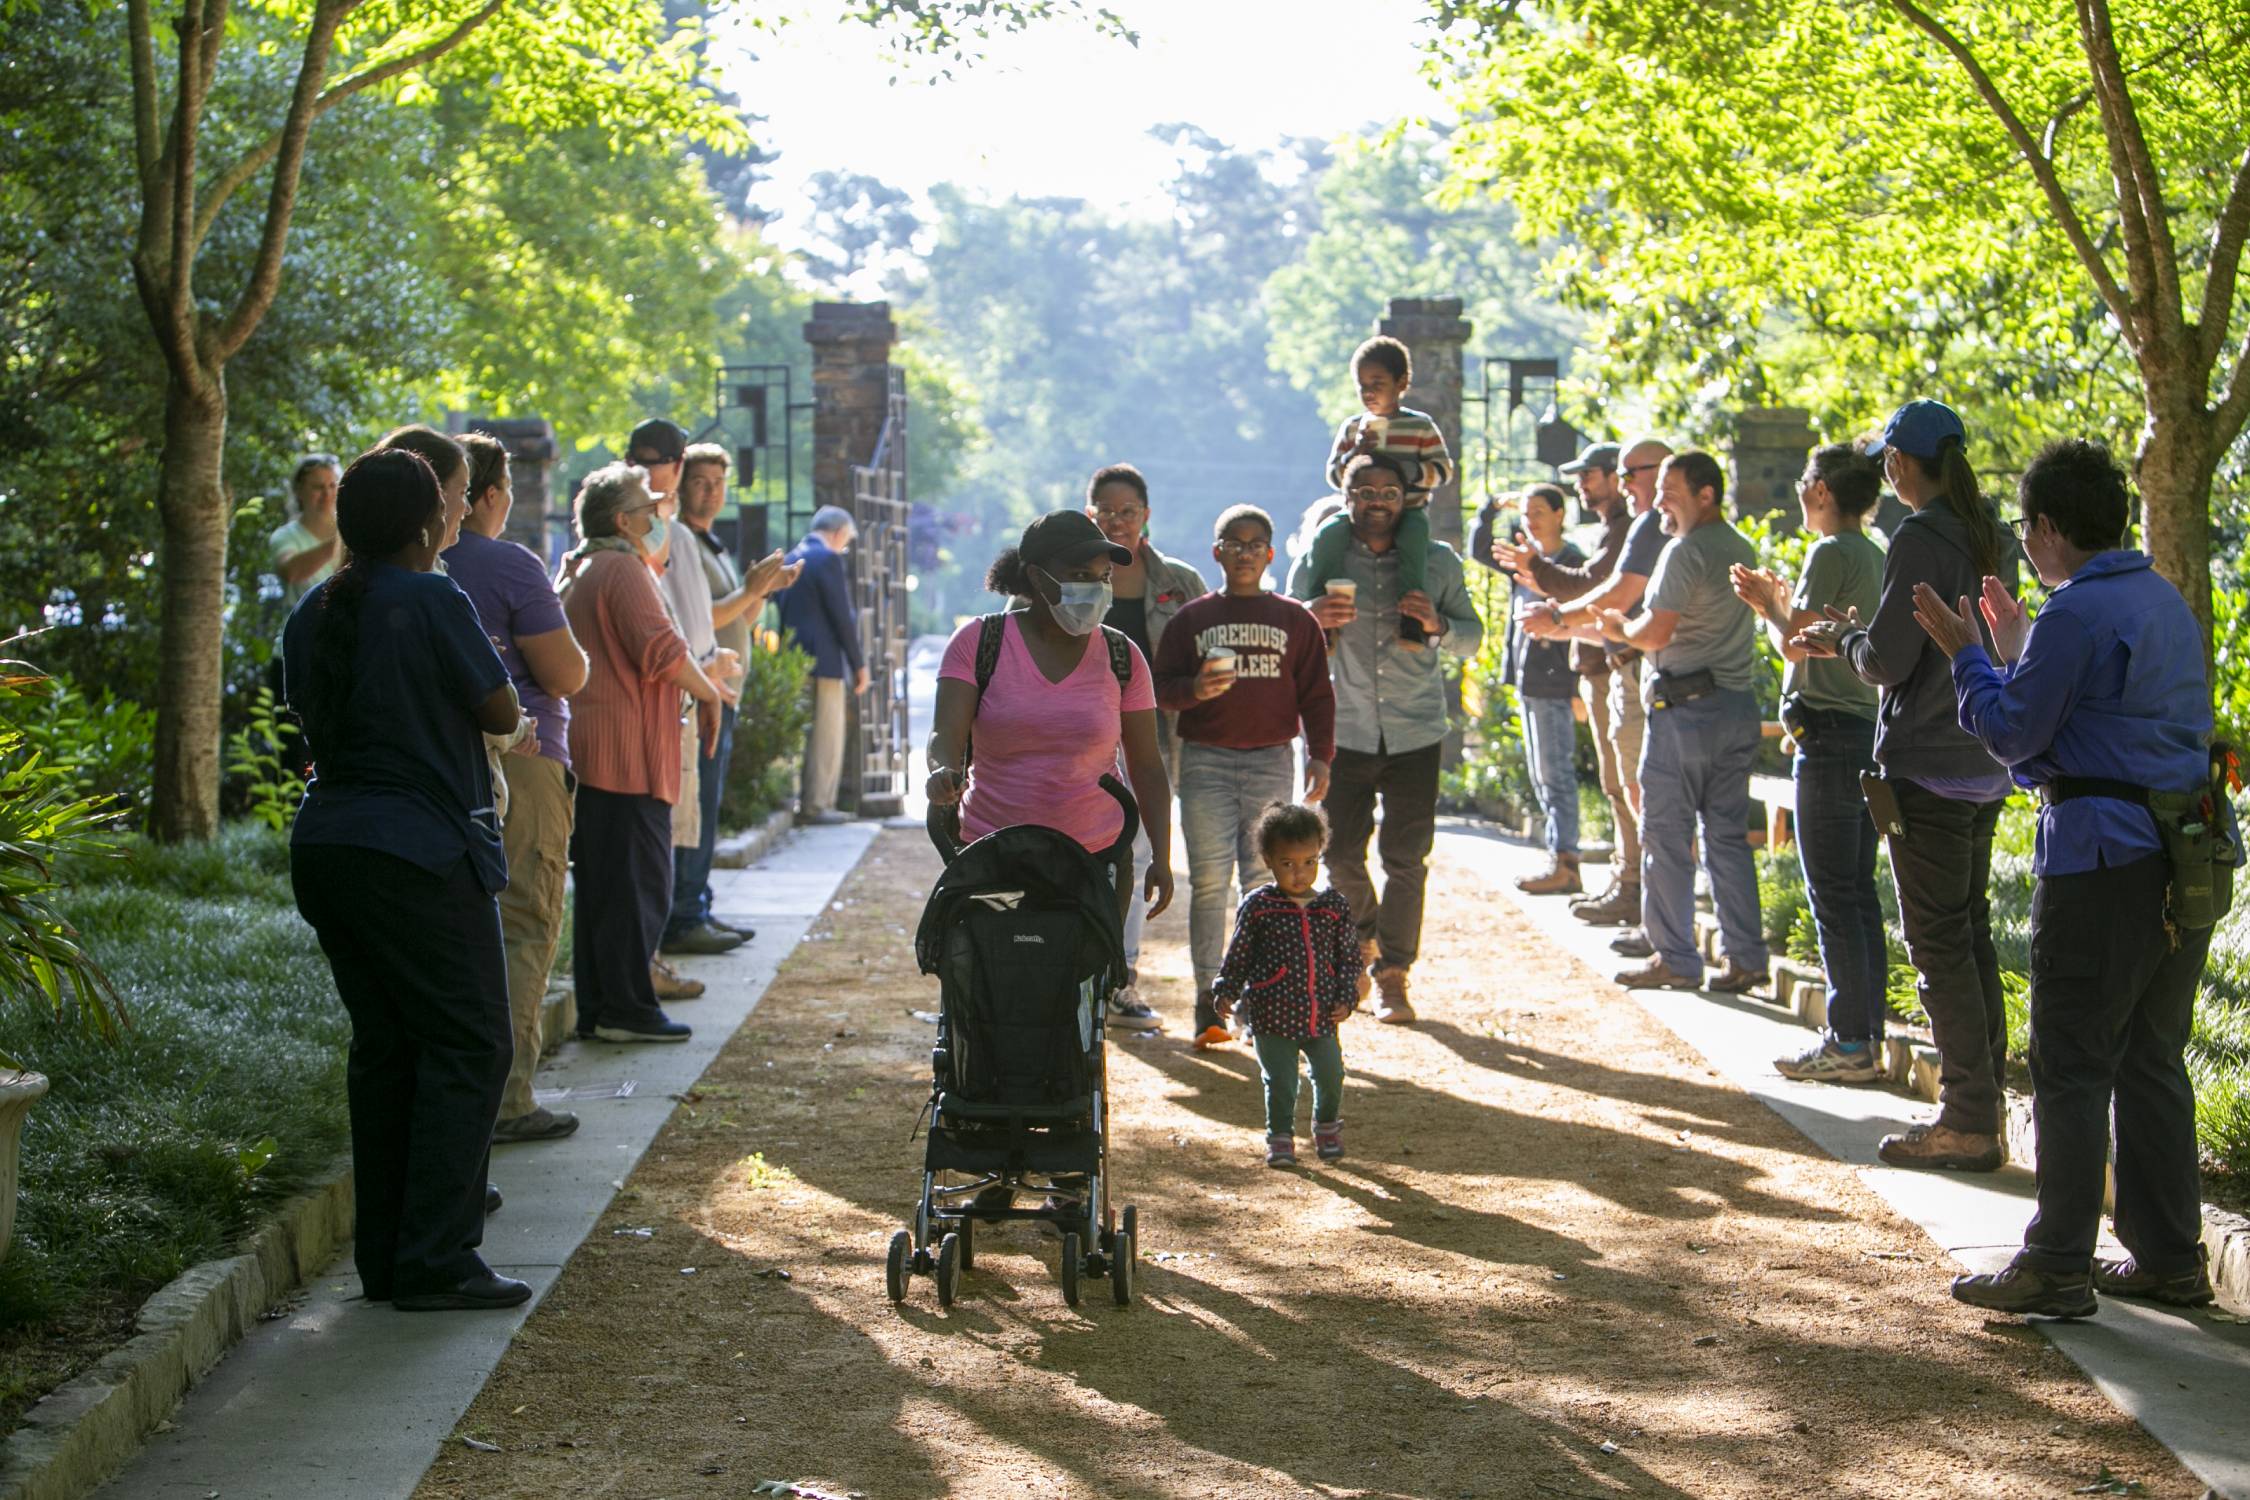 Lined by applauding staff, the first visitors enter through the front gate of Sarah P. Duke Gardens at 8am on Tuesday June 1, 2021.